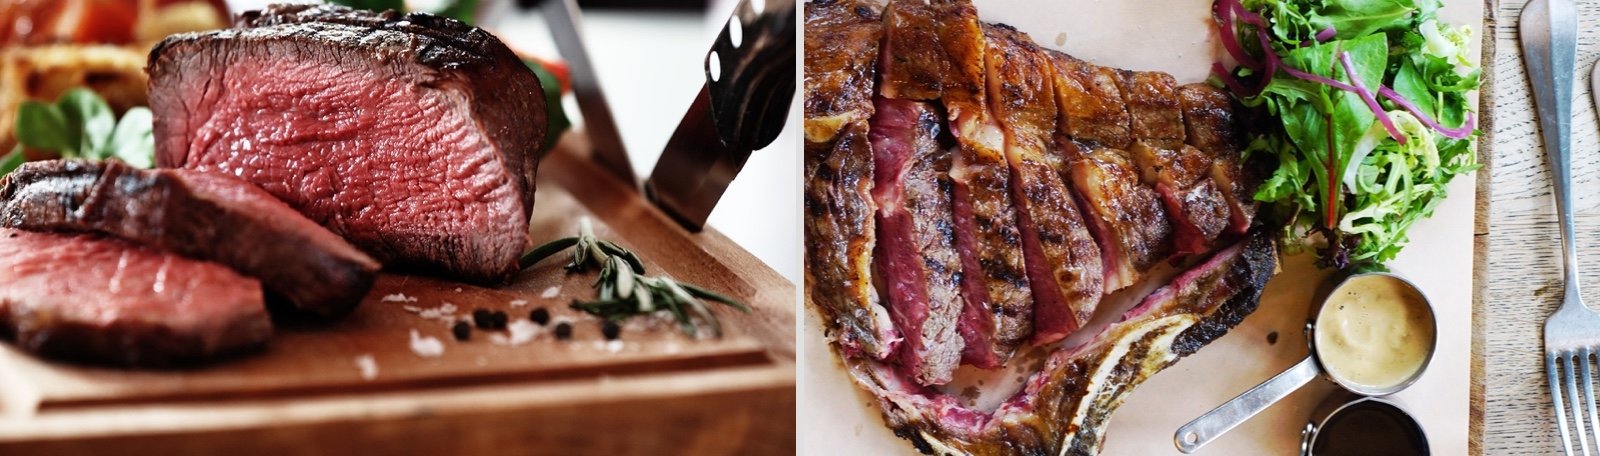 Where to eat steak in Surrey: the county’s top 5 restaurants